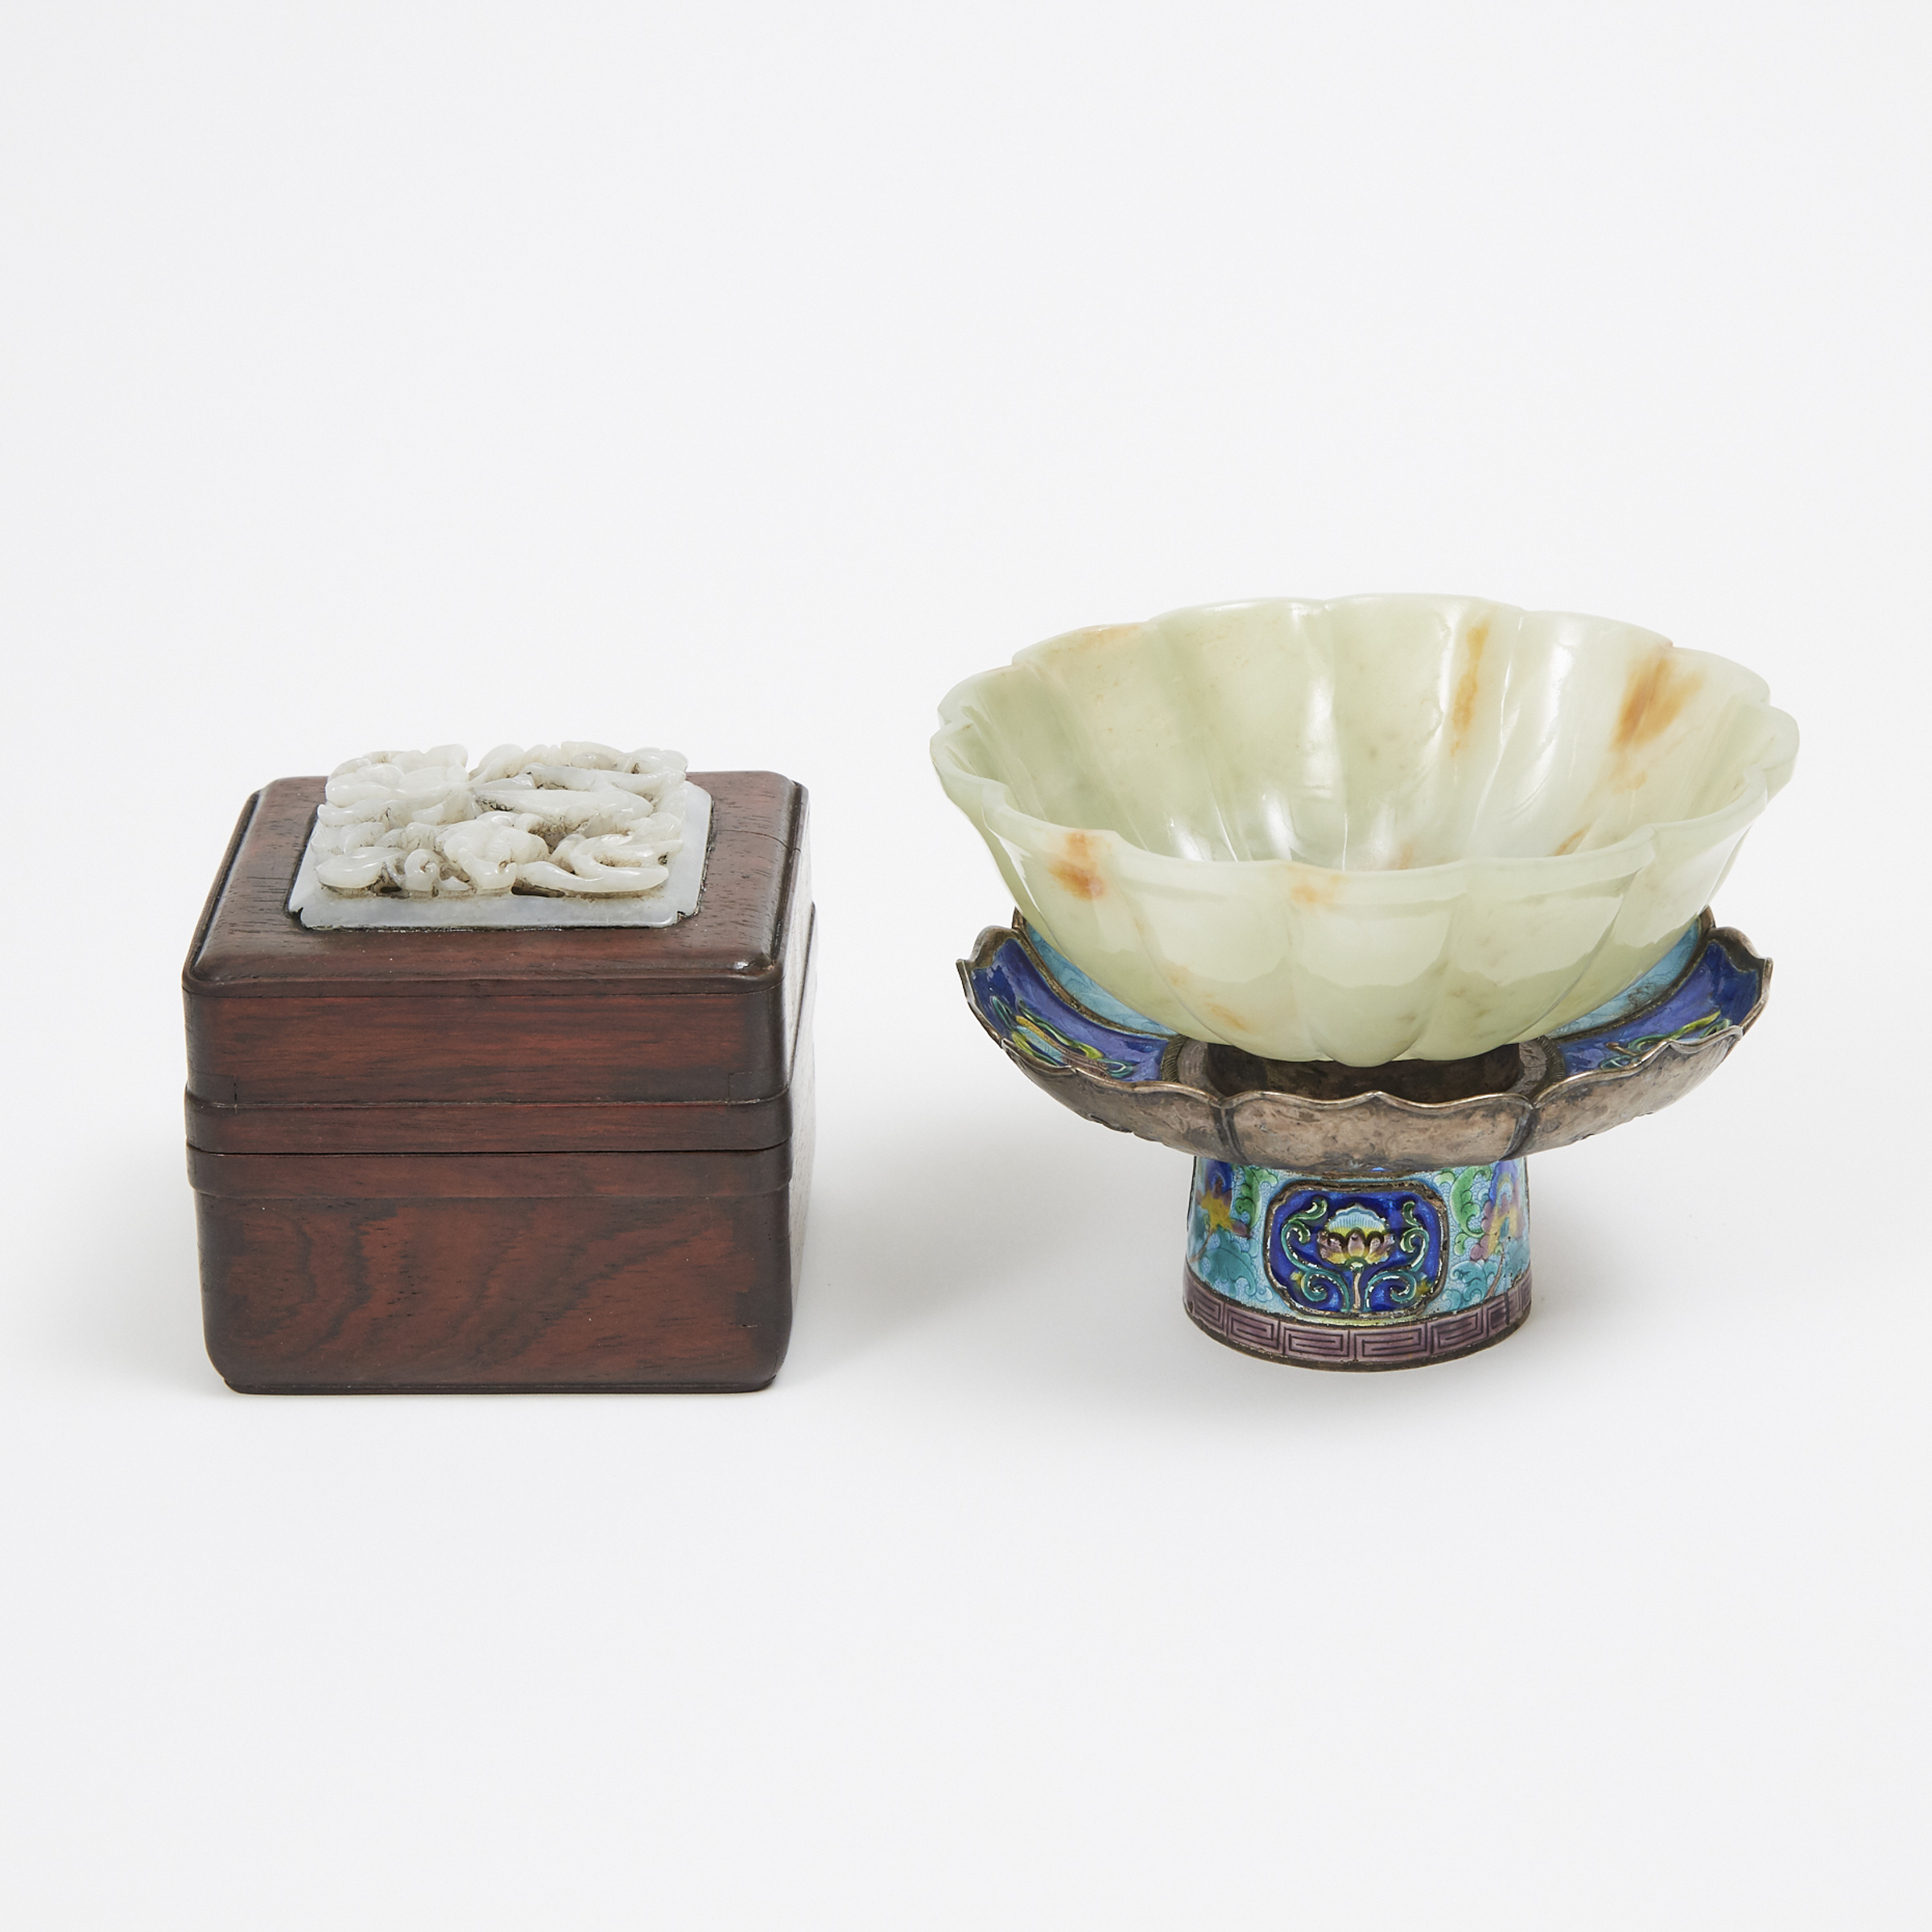 A Celadon Jade Bowl together with a Jade Inlaid Wood Box